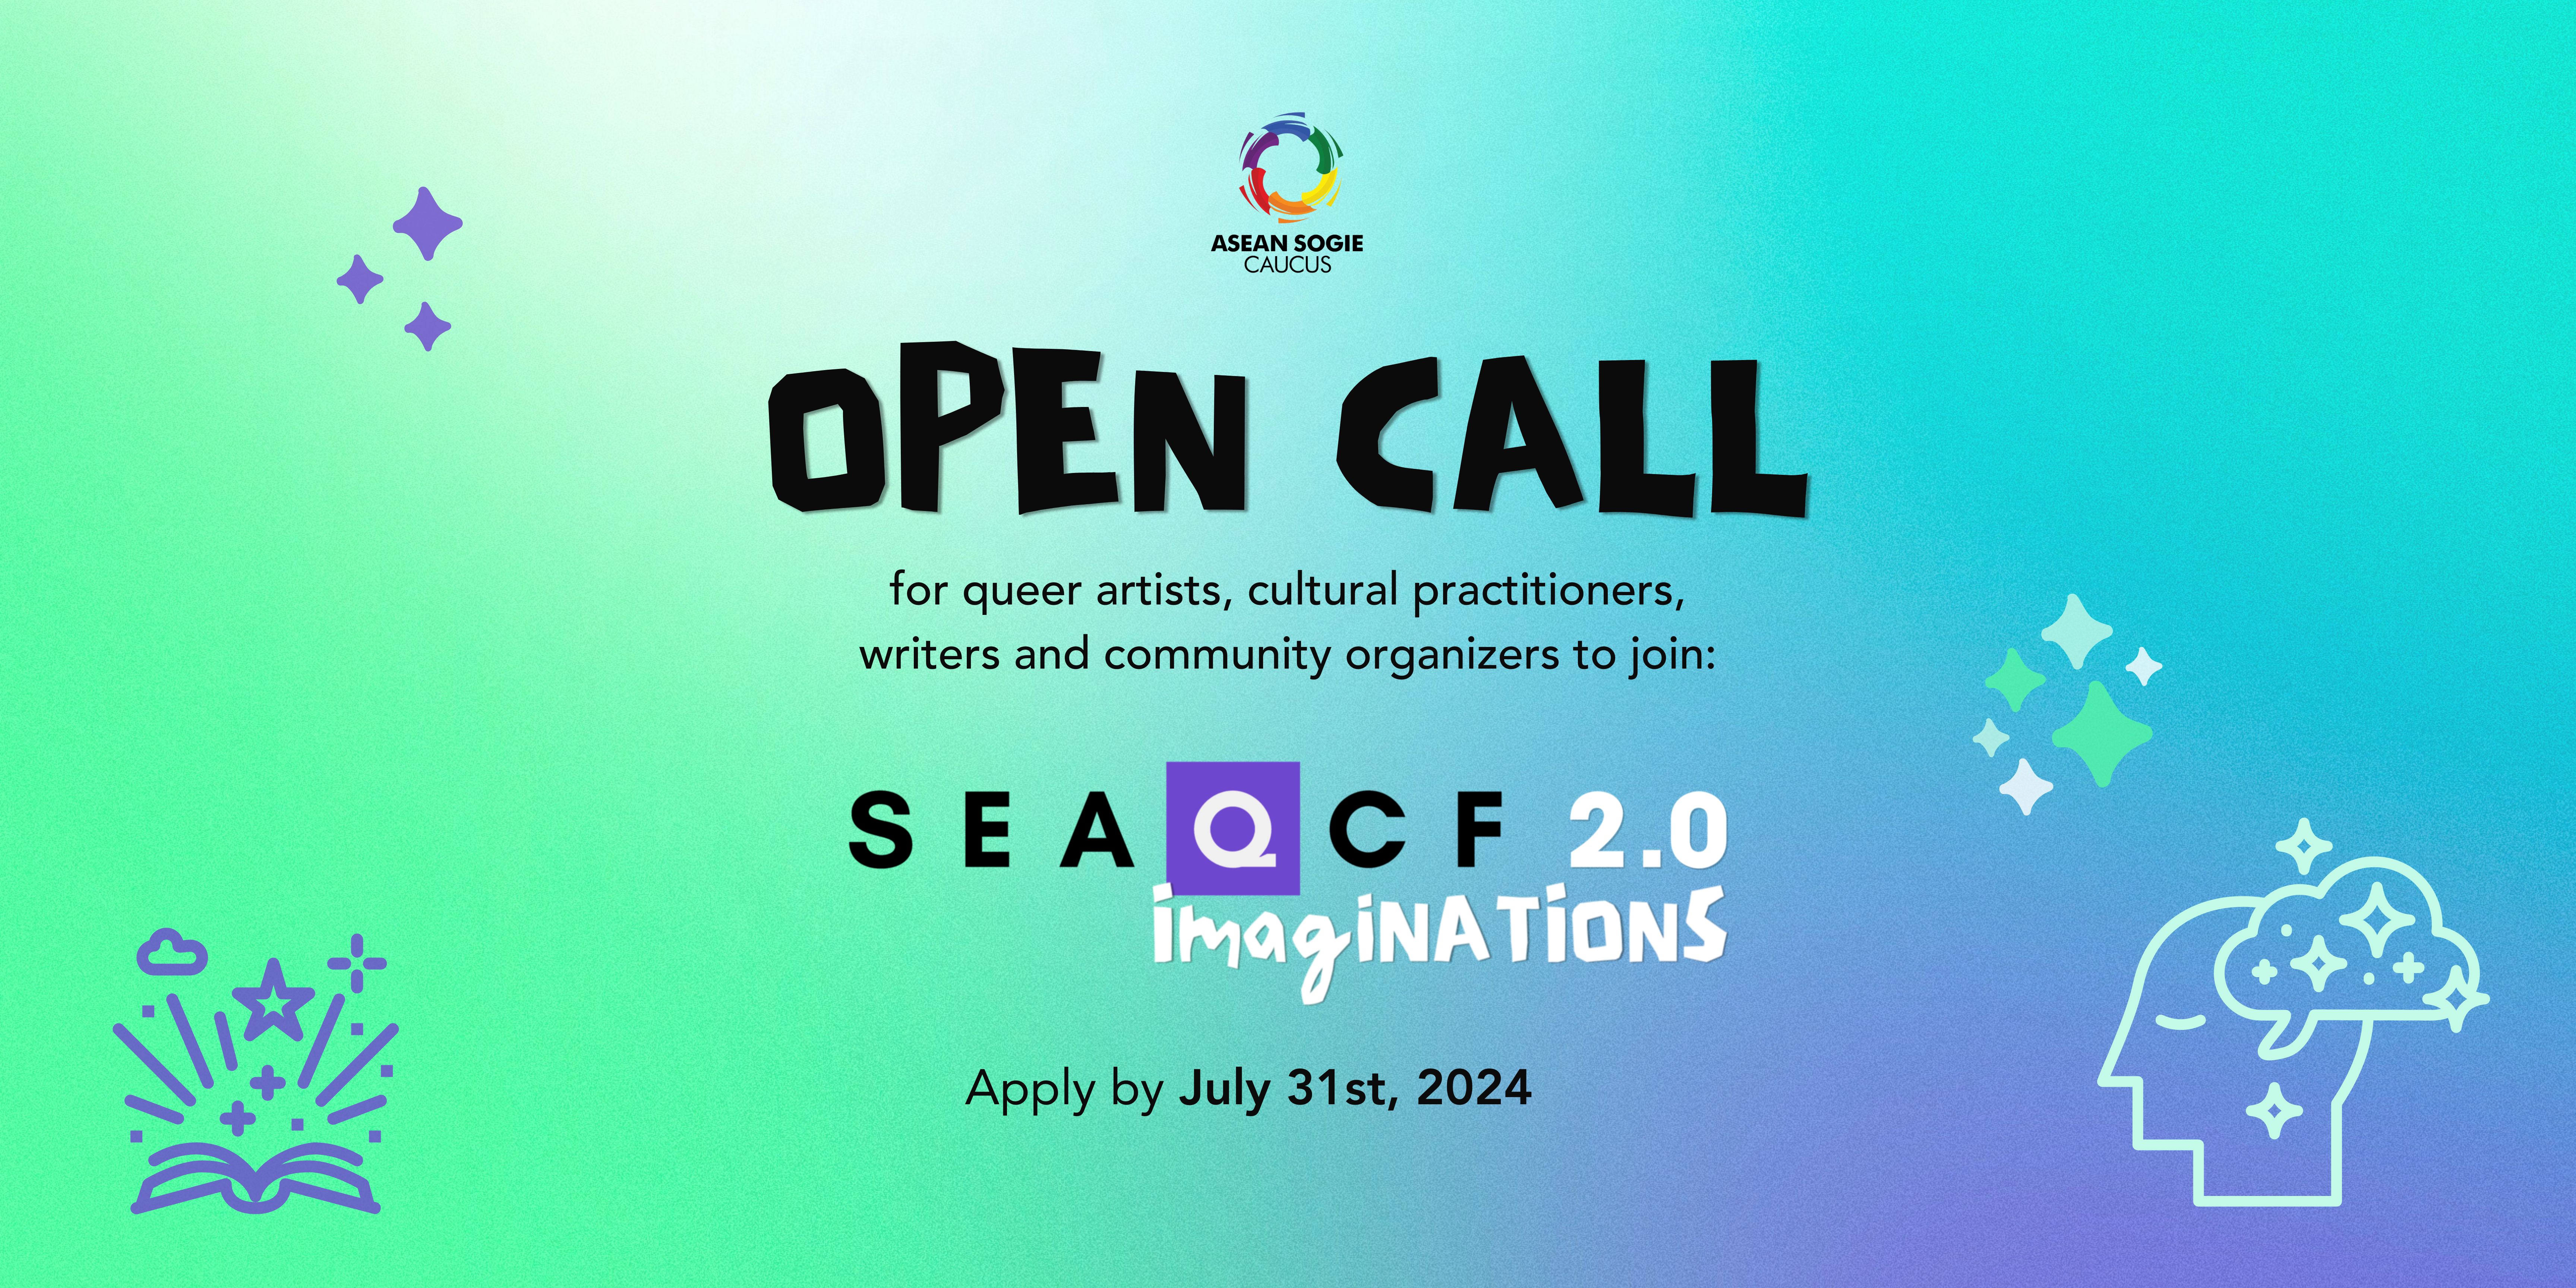 A web banner detailing an open call for queer artists, cultural practitioners, writers and community organisers to join SEAQCF 2.0: ImagiNATIONS